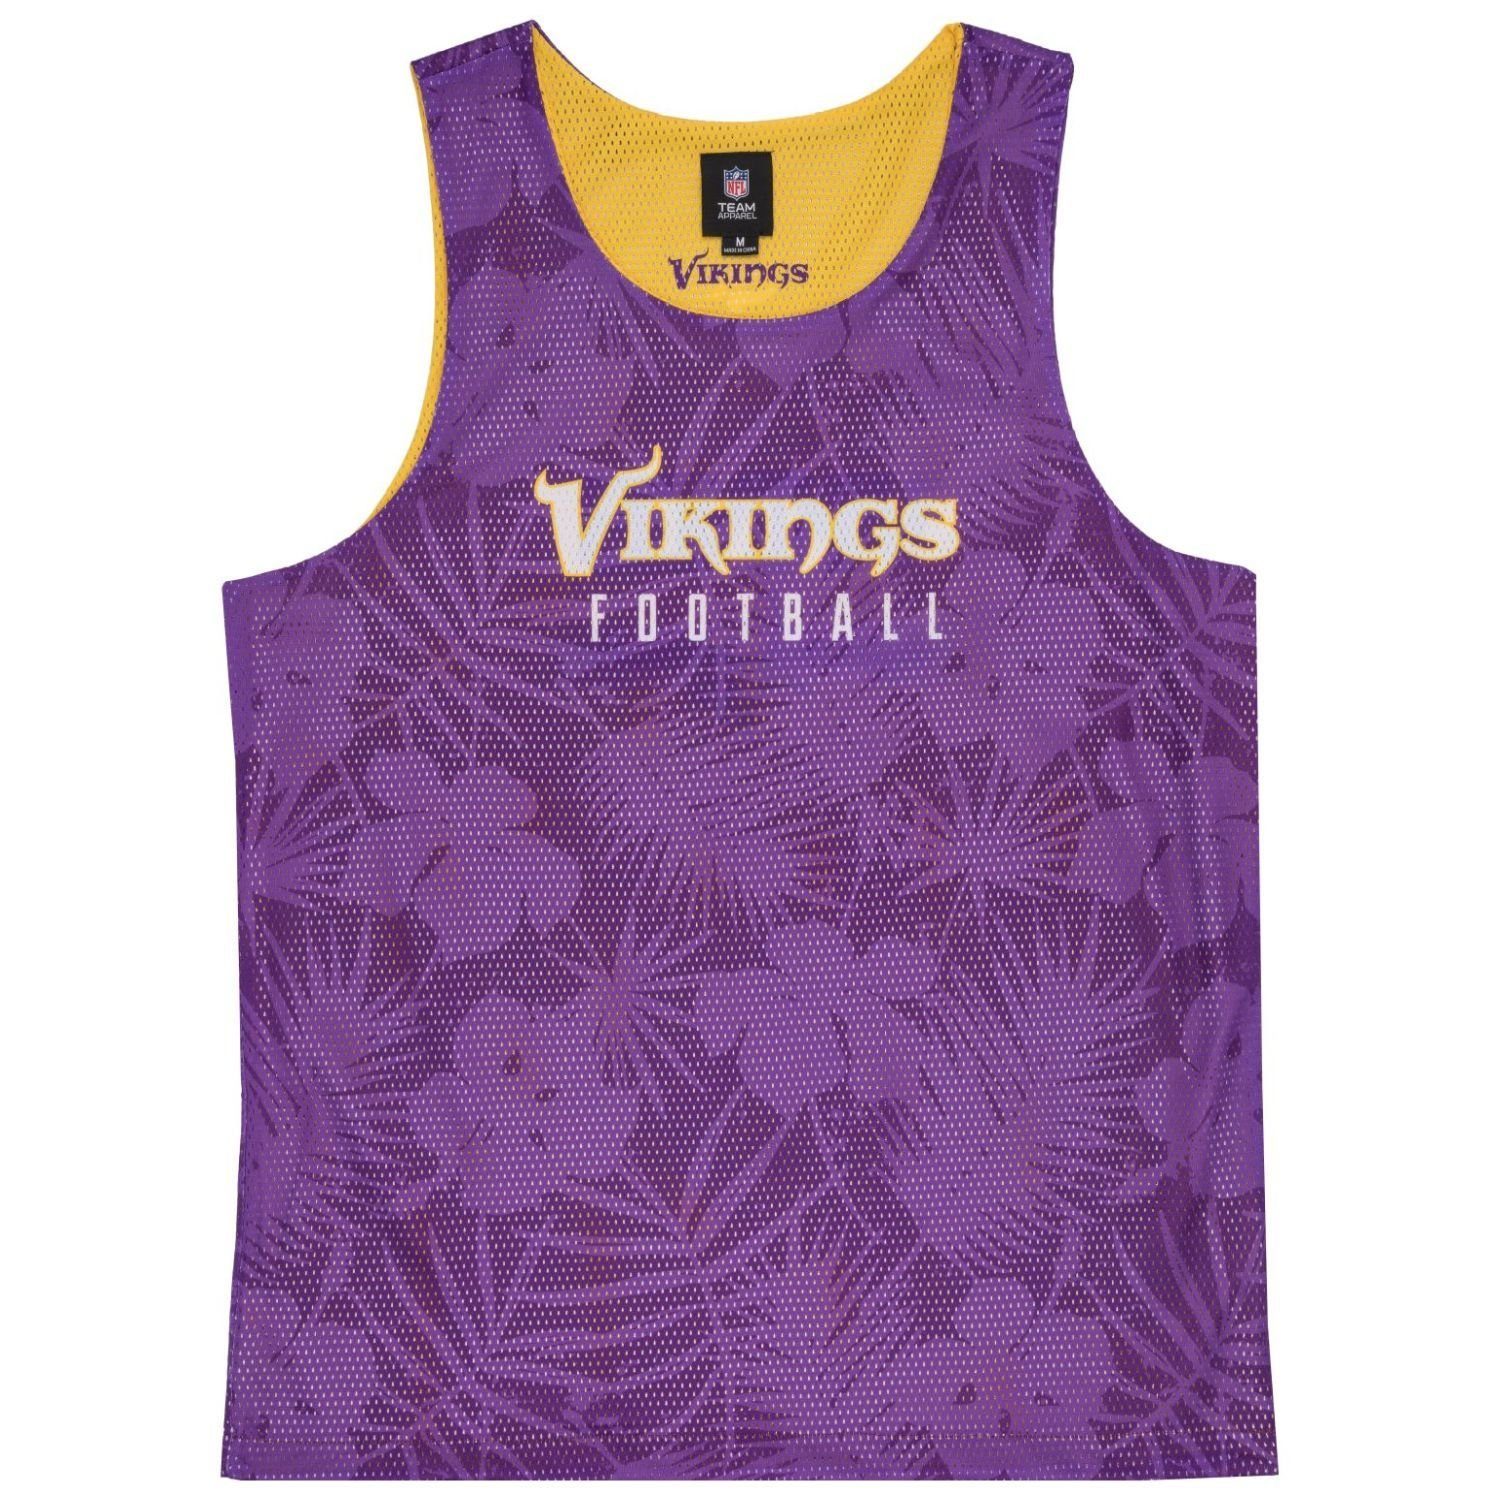 Minnesota Reversible Floral Collectibles NFL Forever Vikings Muskelshirt